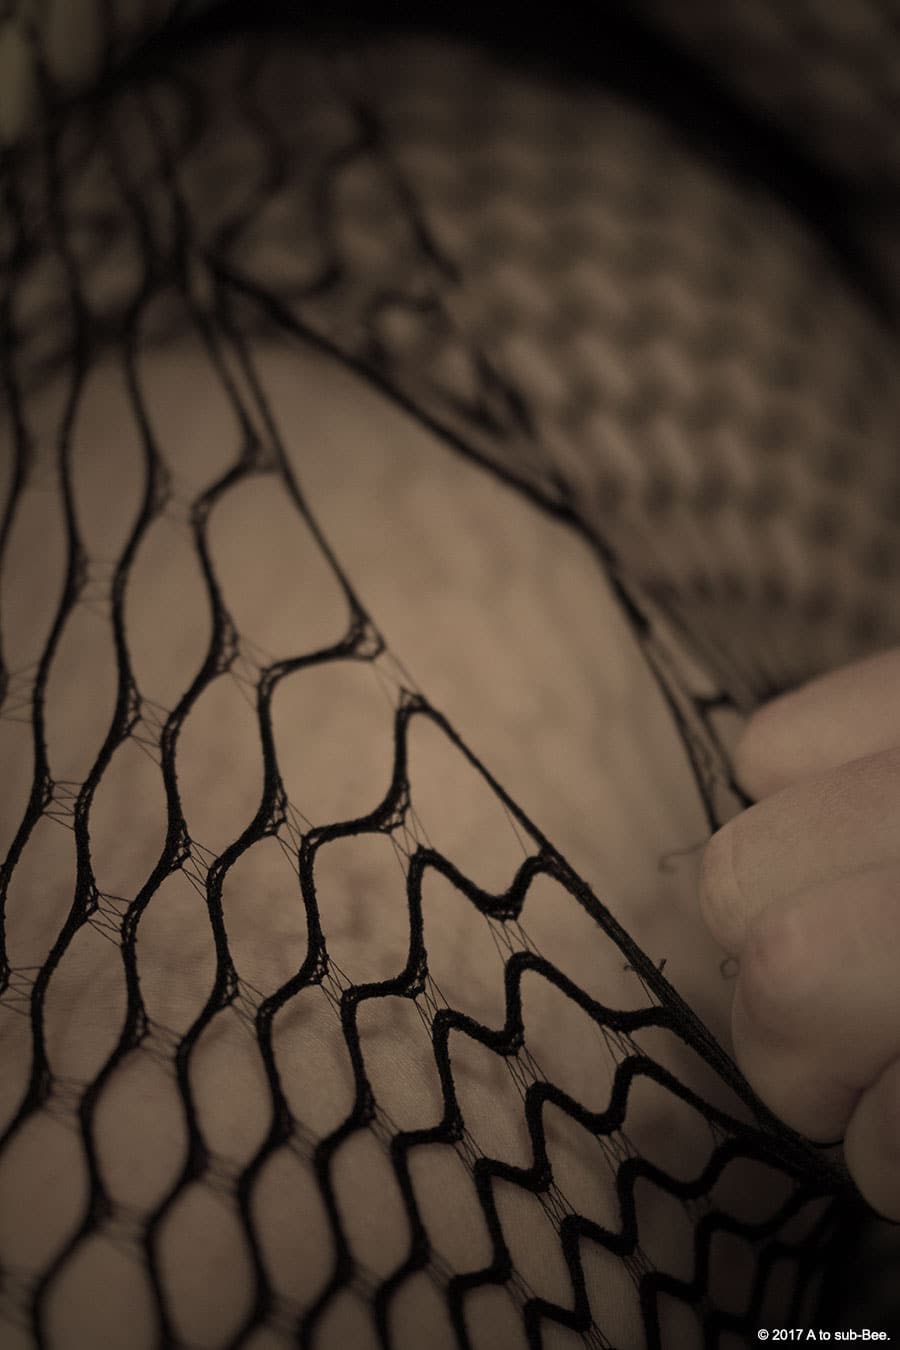 Bee wearing a fishnet body stocking and having it torn off them